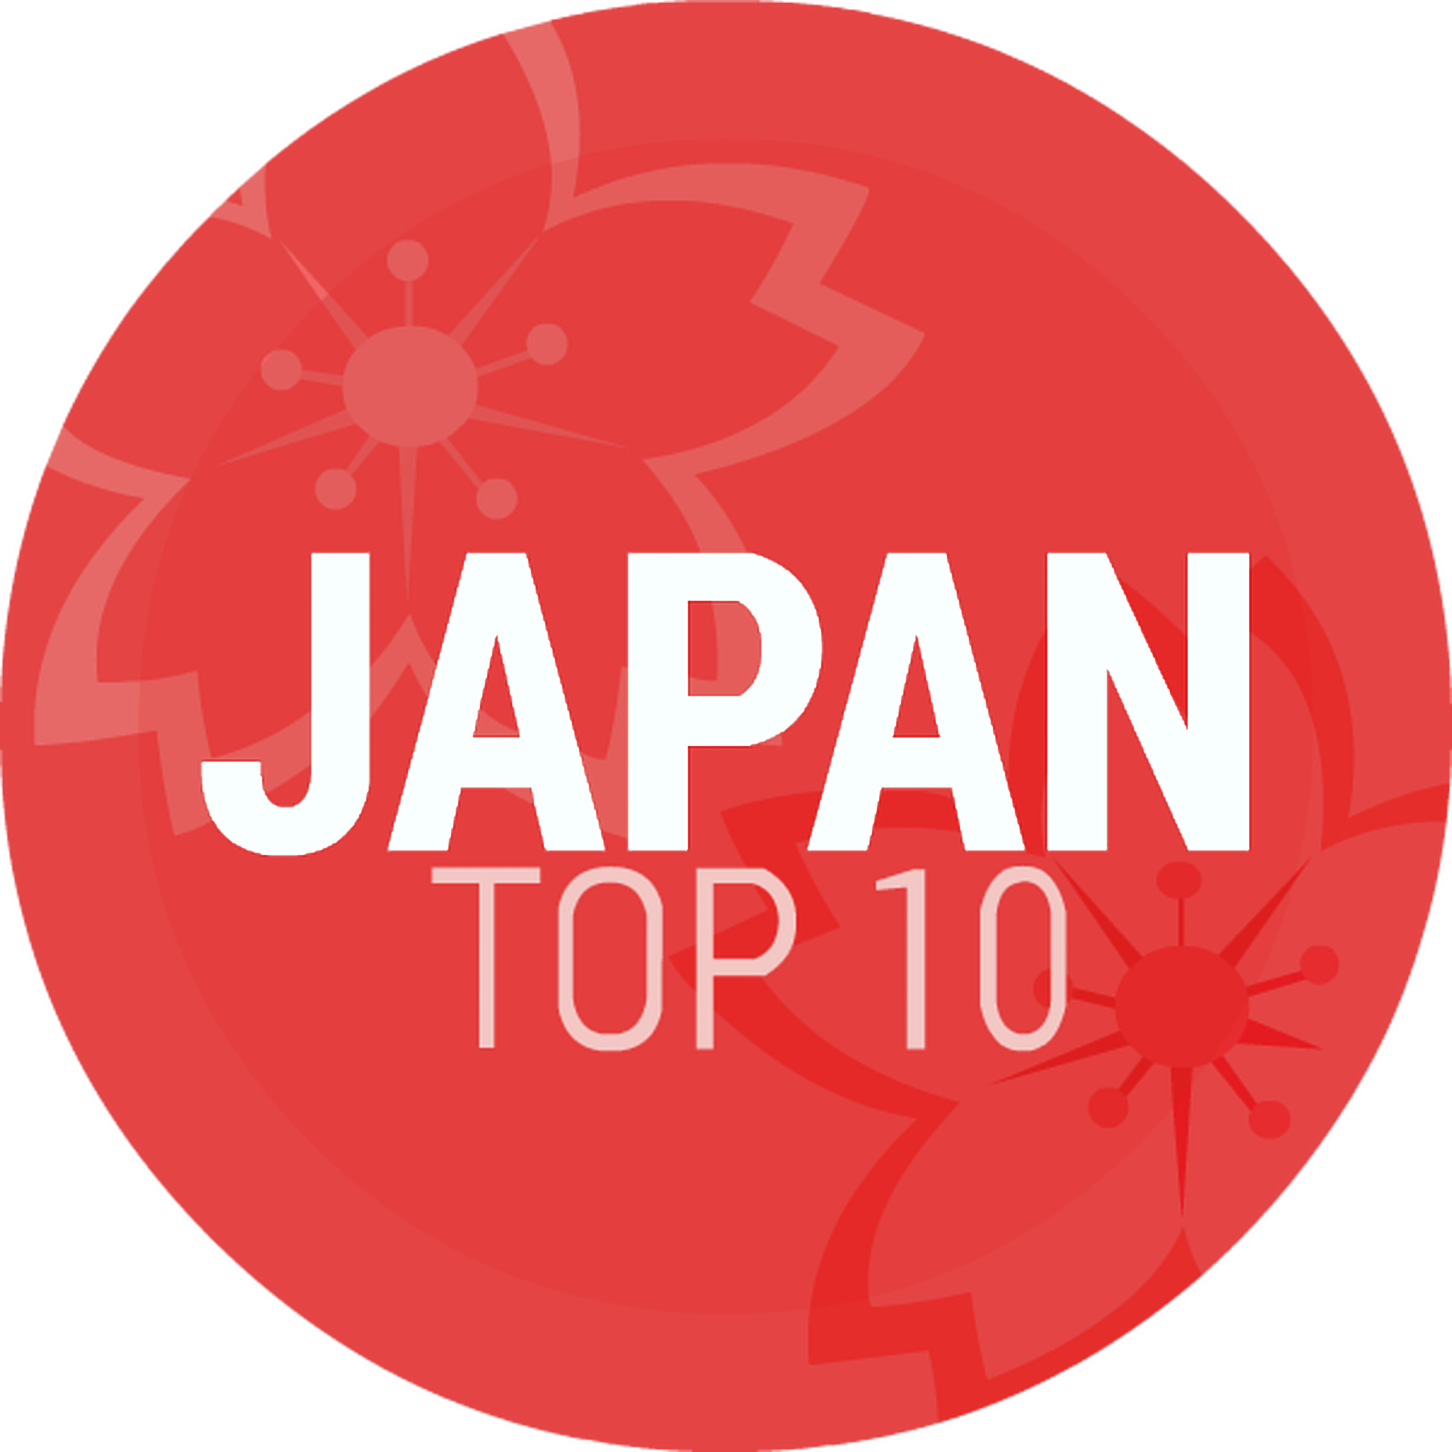 Episode 230: Japan Top 10 April 2018 Special: Viral Japanese songs of this decade so far